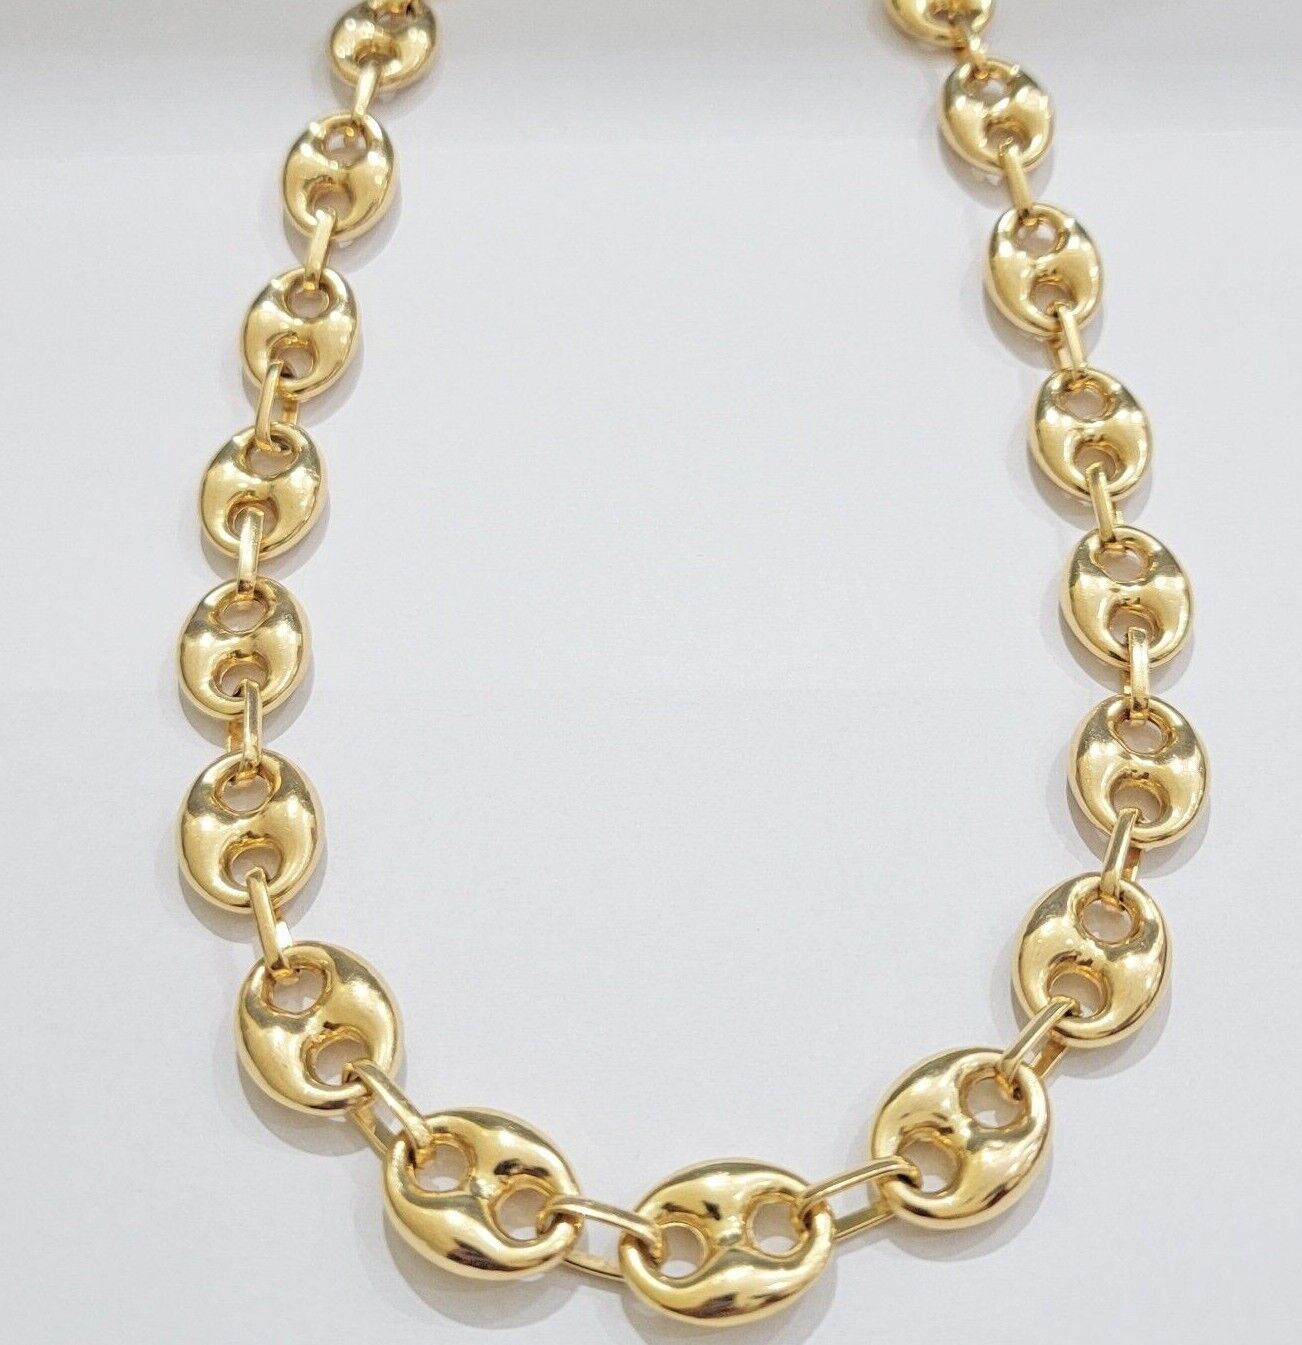 Puffed Mariner Anchor Link Chain Necklace 26"Inch 14mm Men REAL 10KT YELLOW GOLD